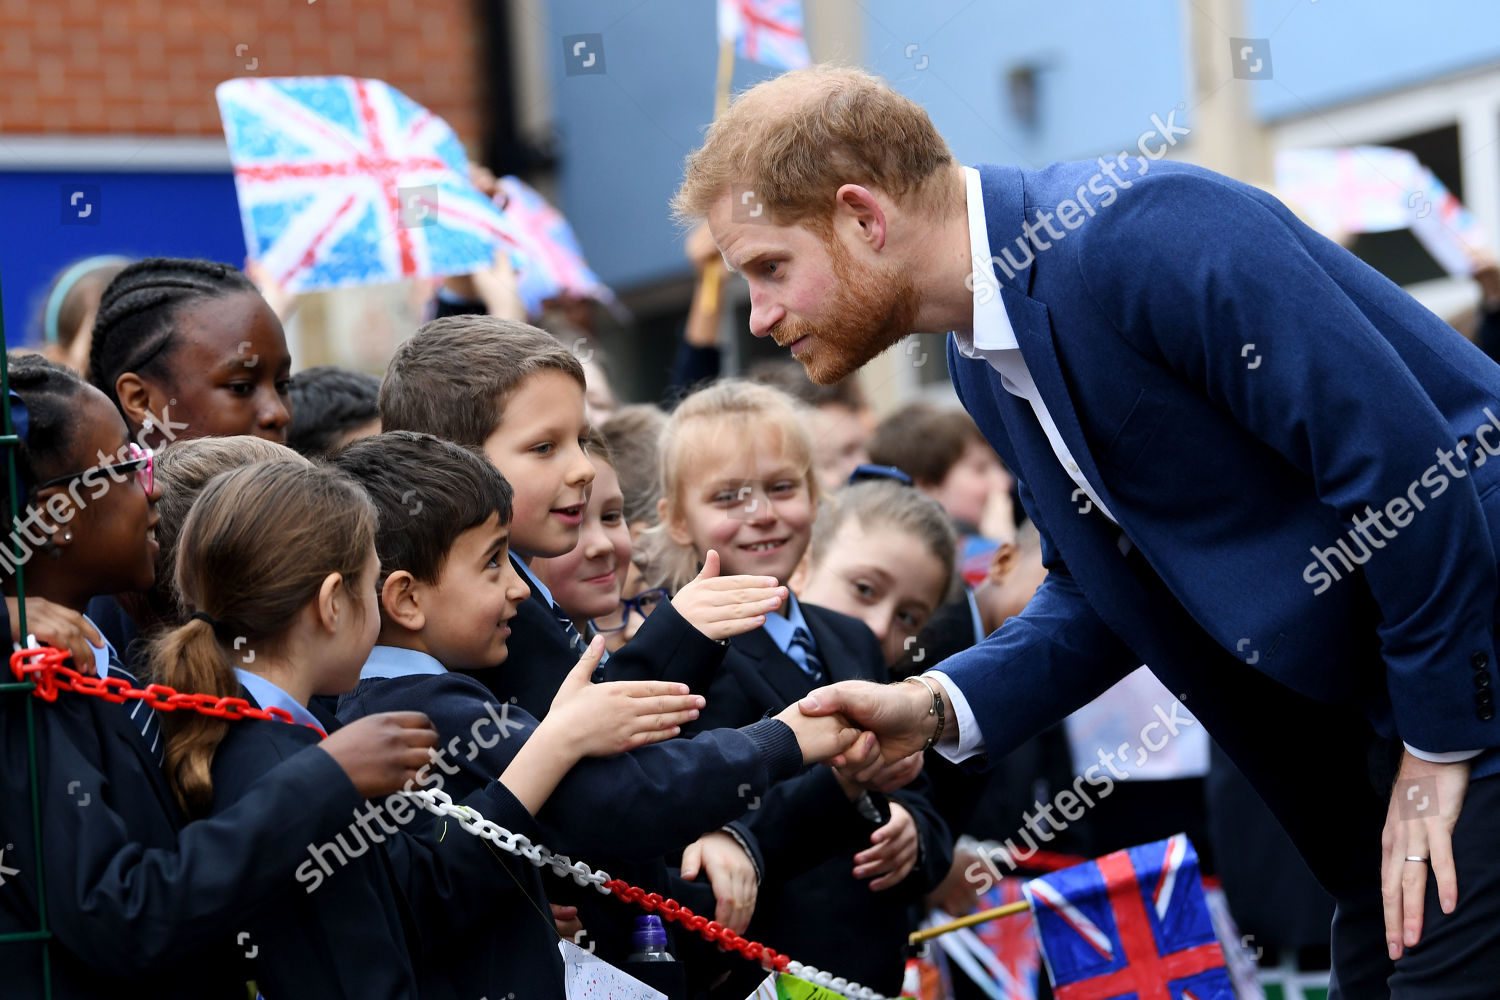 prince-harry-visits-st-vincents-catholic-primary-school-for-commonwealth-canopy-and-woodland-trust-tree-planting-ceremony-london-uk-shutterstock-editorial-10160984al.jpg